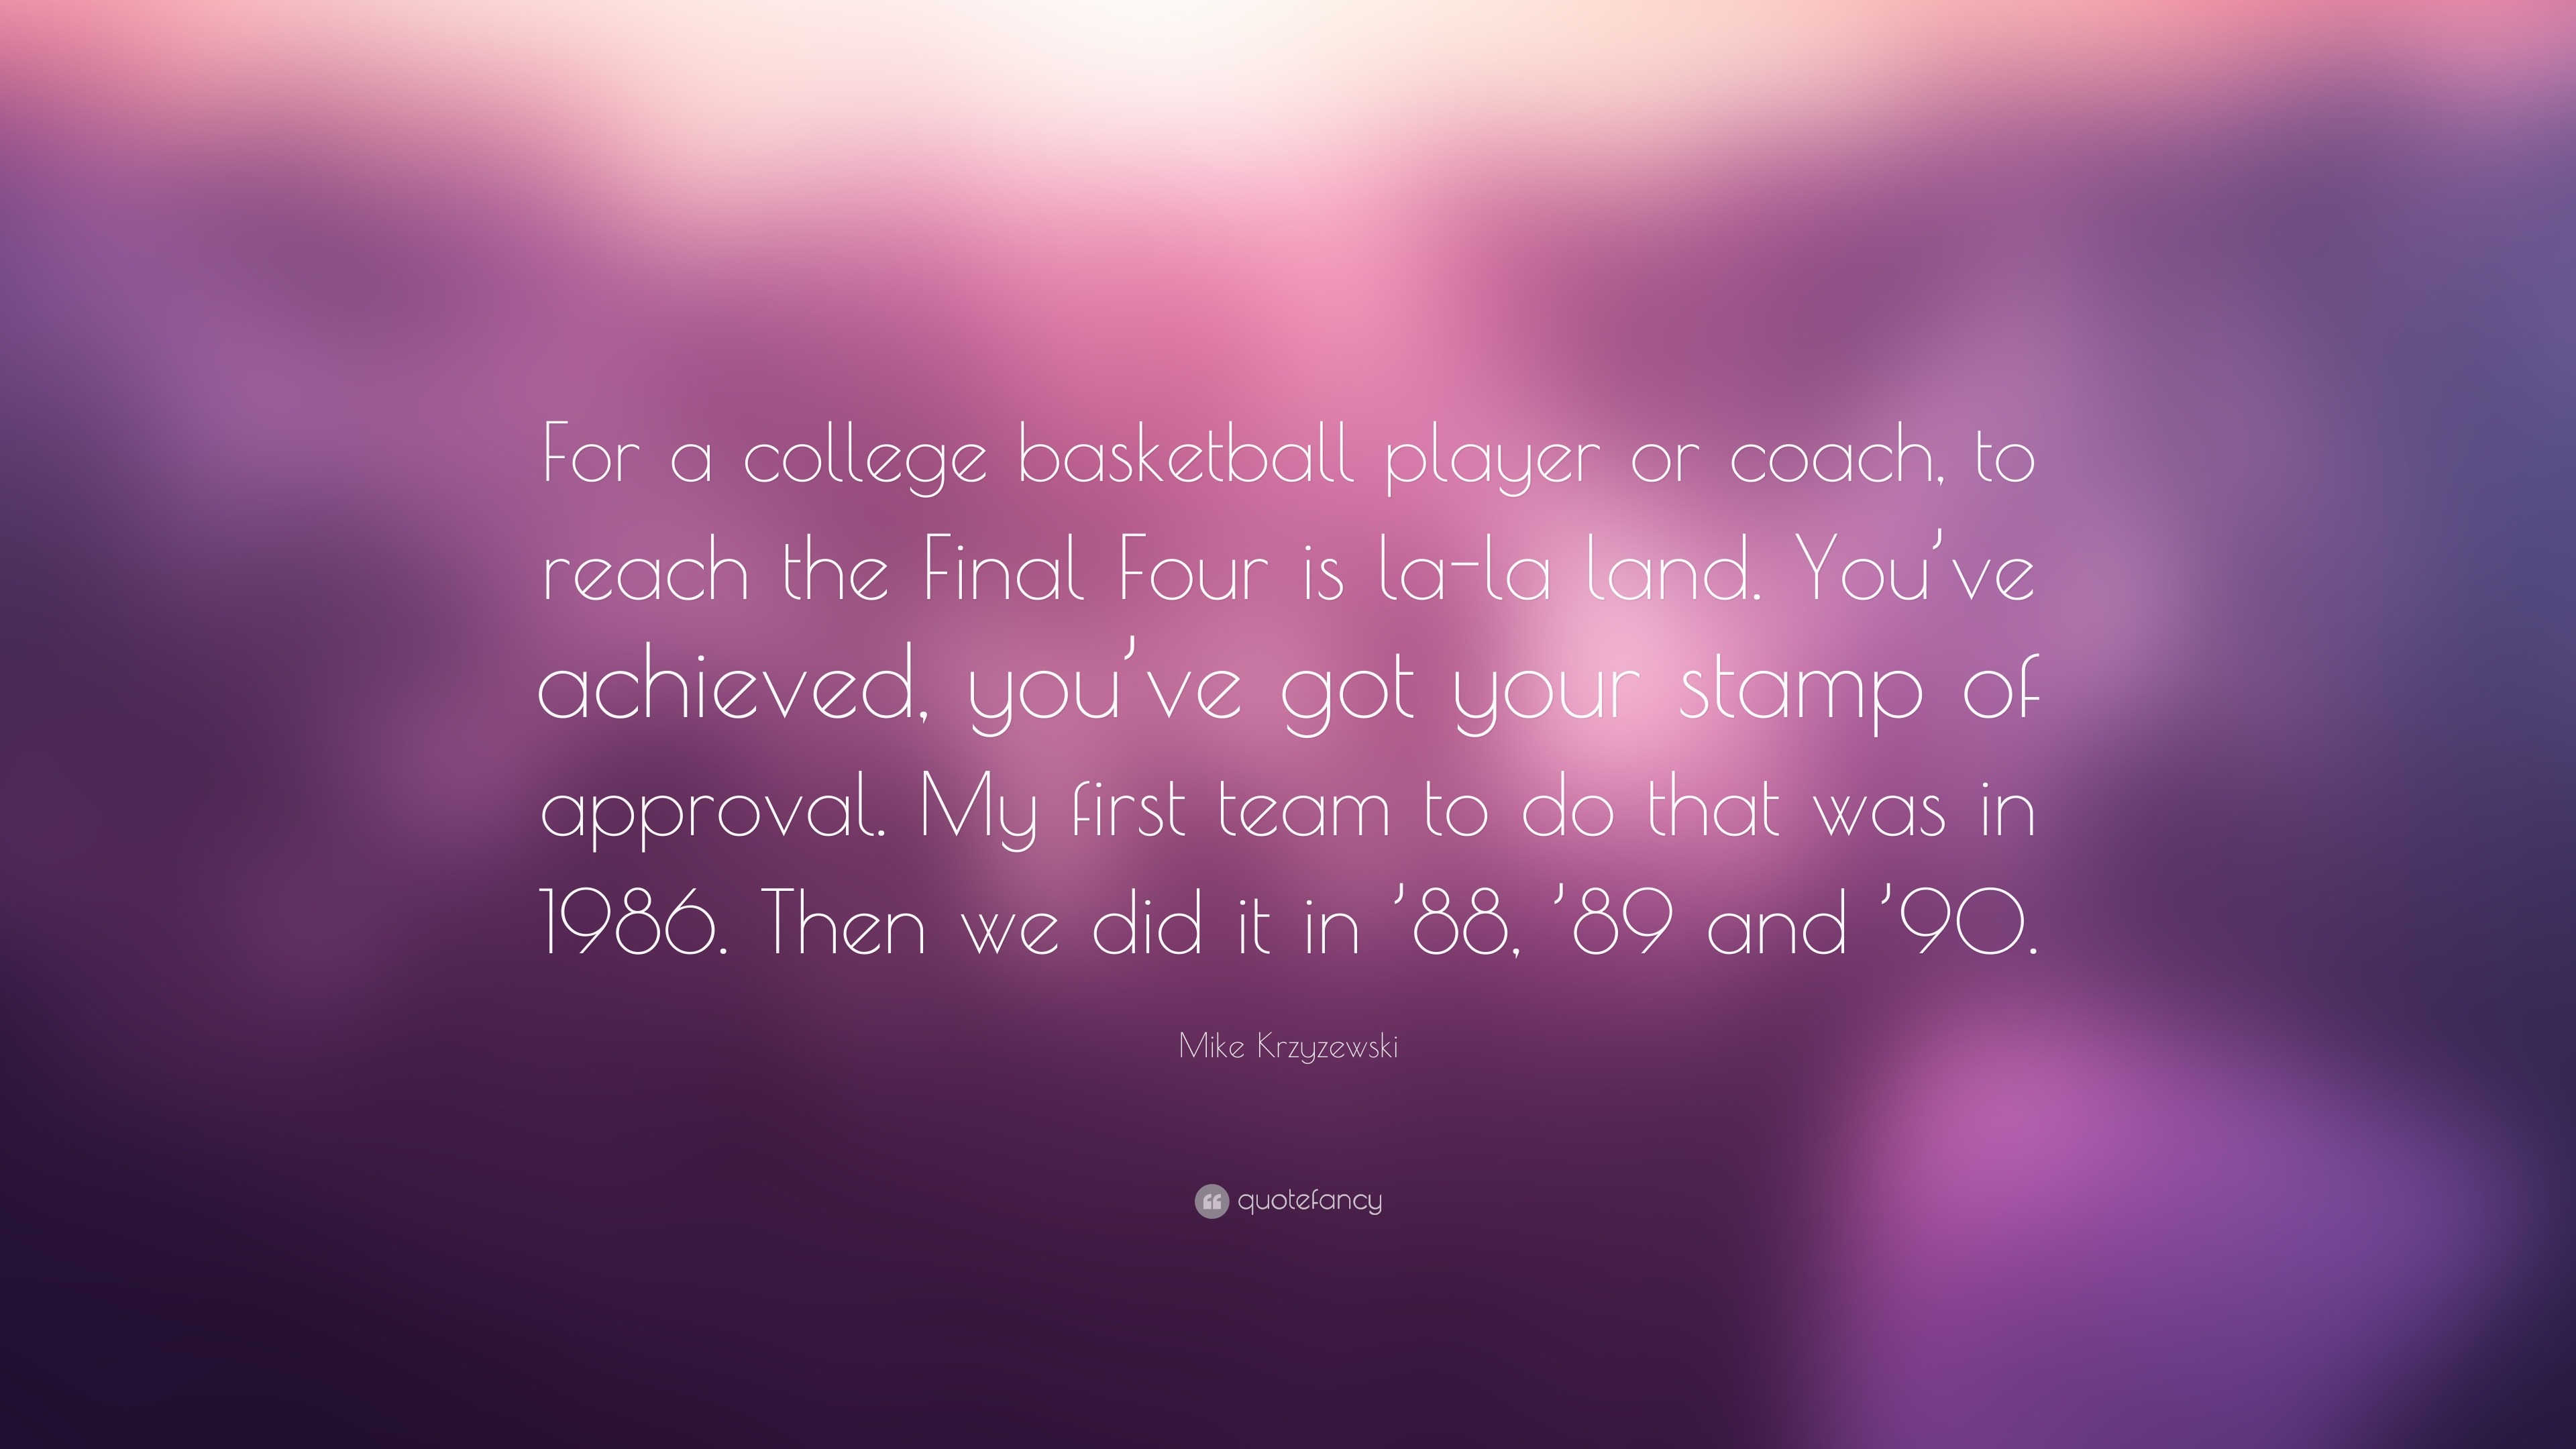 Mike Krzyzewski Quote For A College Basketball Player Or Coach To Reach The Final Four Is La La Land You Ve Achieved You Ve Got Your Stamp 7 Wallpapers Quotefancy